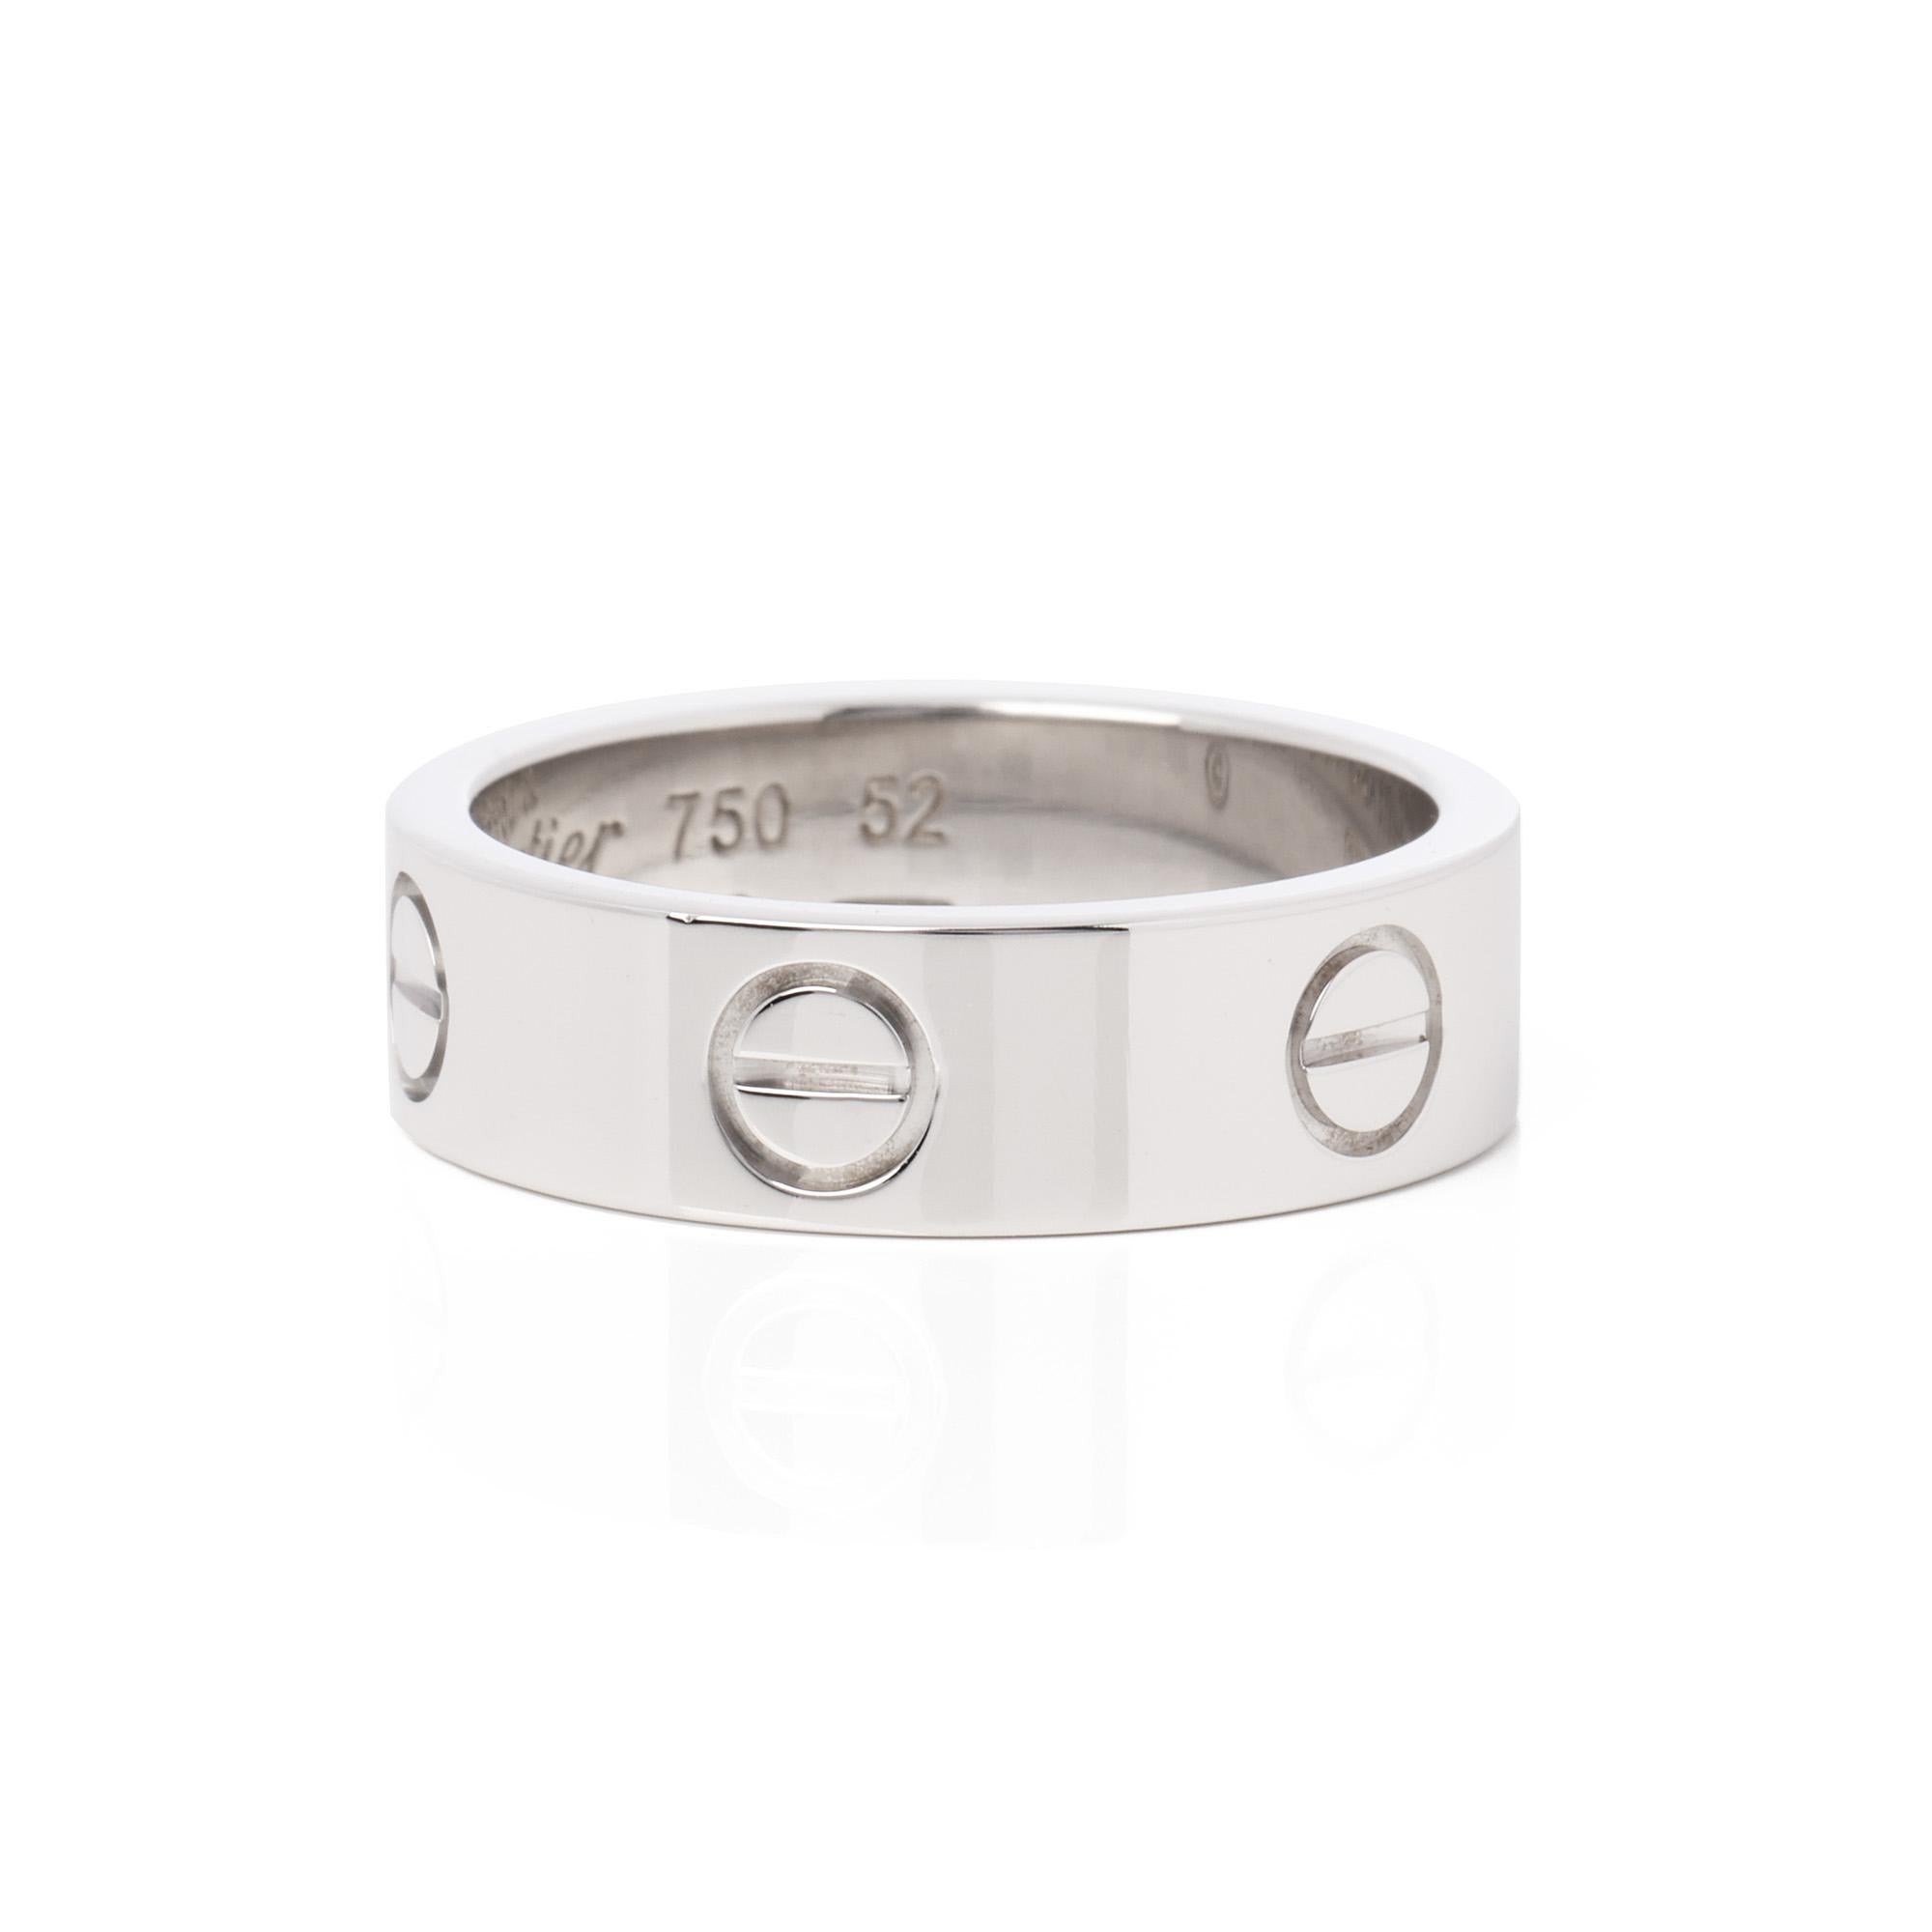 This ring by Cartier is from their Love collection and features their iconic screw detail set in 18ct white gold. Complete with a Xupes presentation box. UK ring size L 1/2. EU ring size 52. US ring size 6 1/2. Our reference is J558 should you need